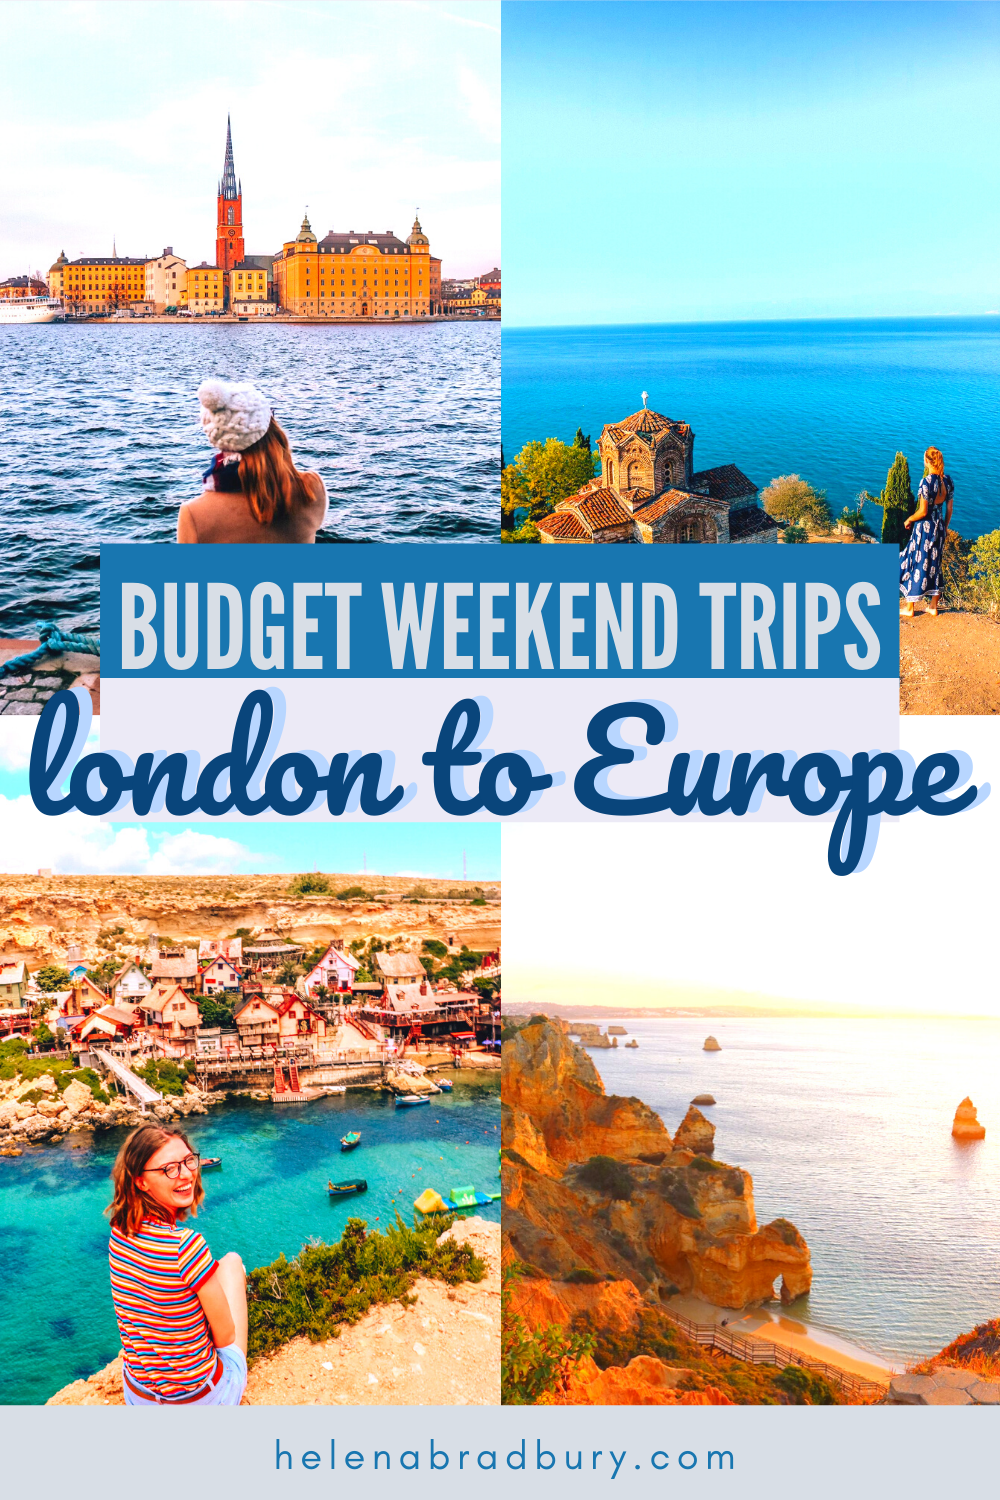 The best budget weekend trips to Europe from London